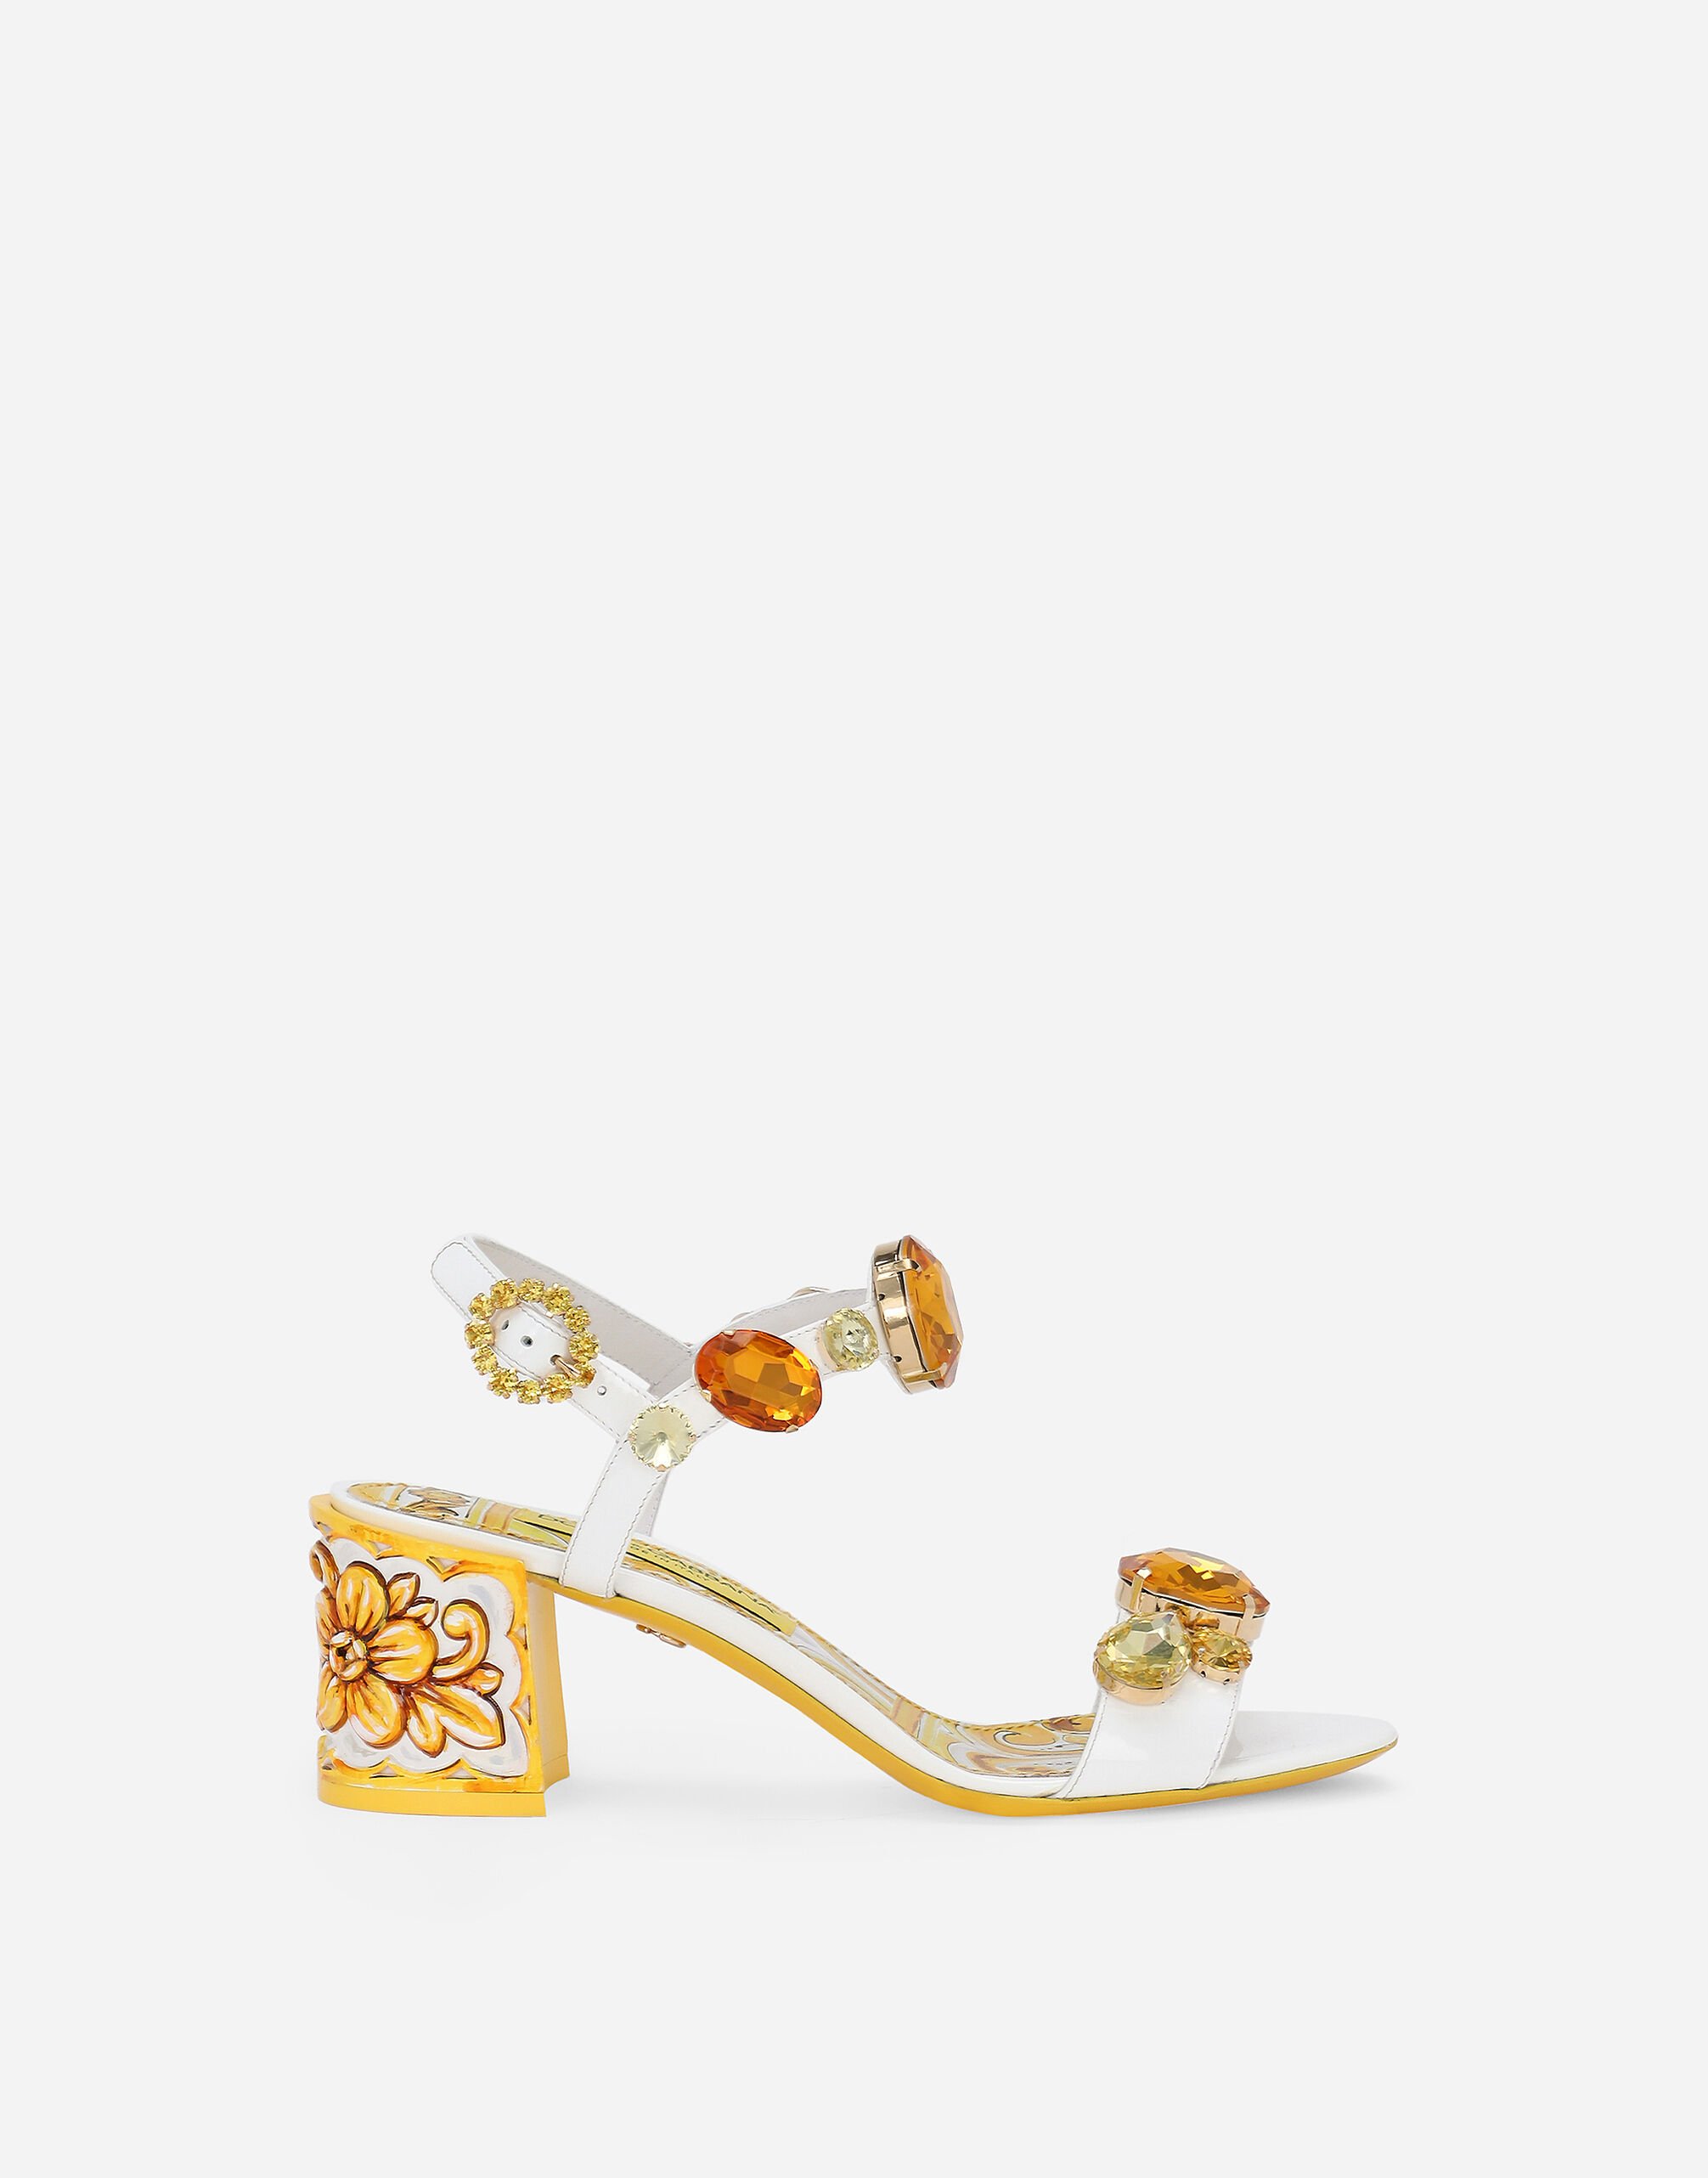 Dolce & Gabbana Patent leather sandals with stone embellishment and painted heel Yellow BB6003AW050